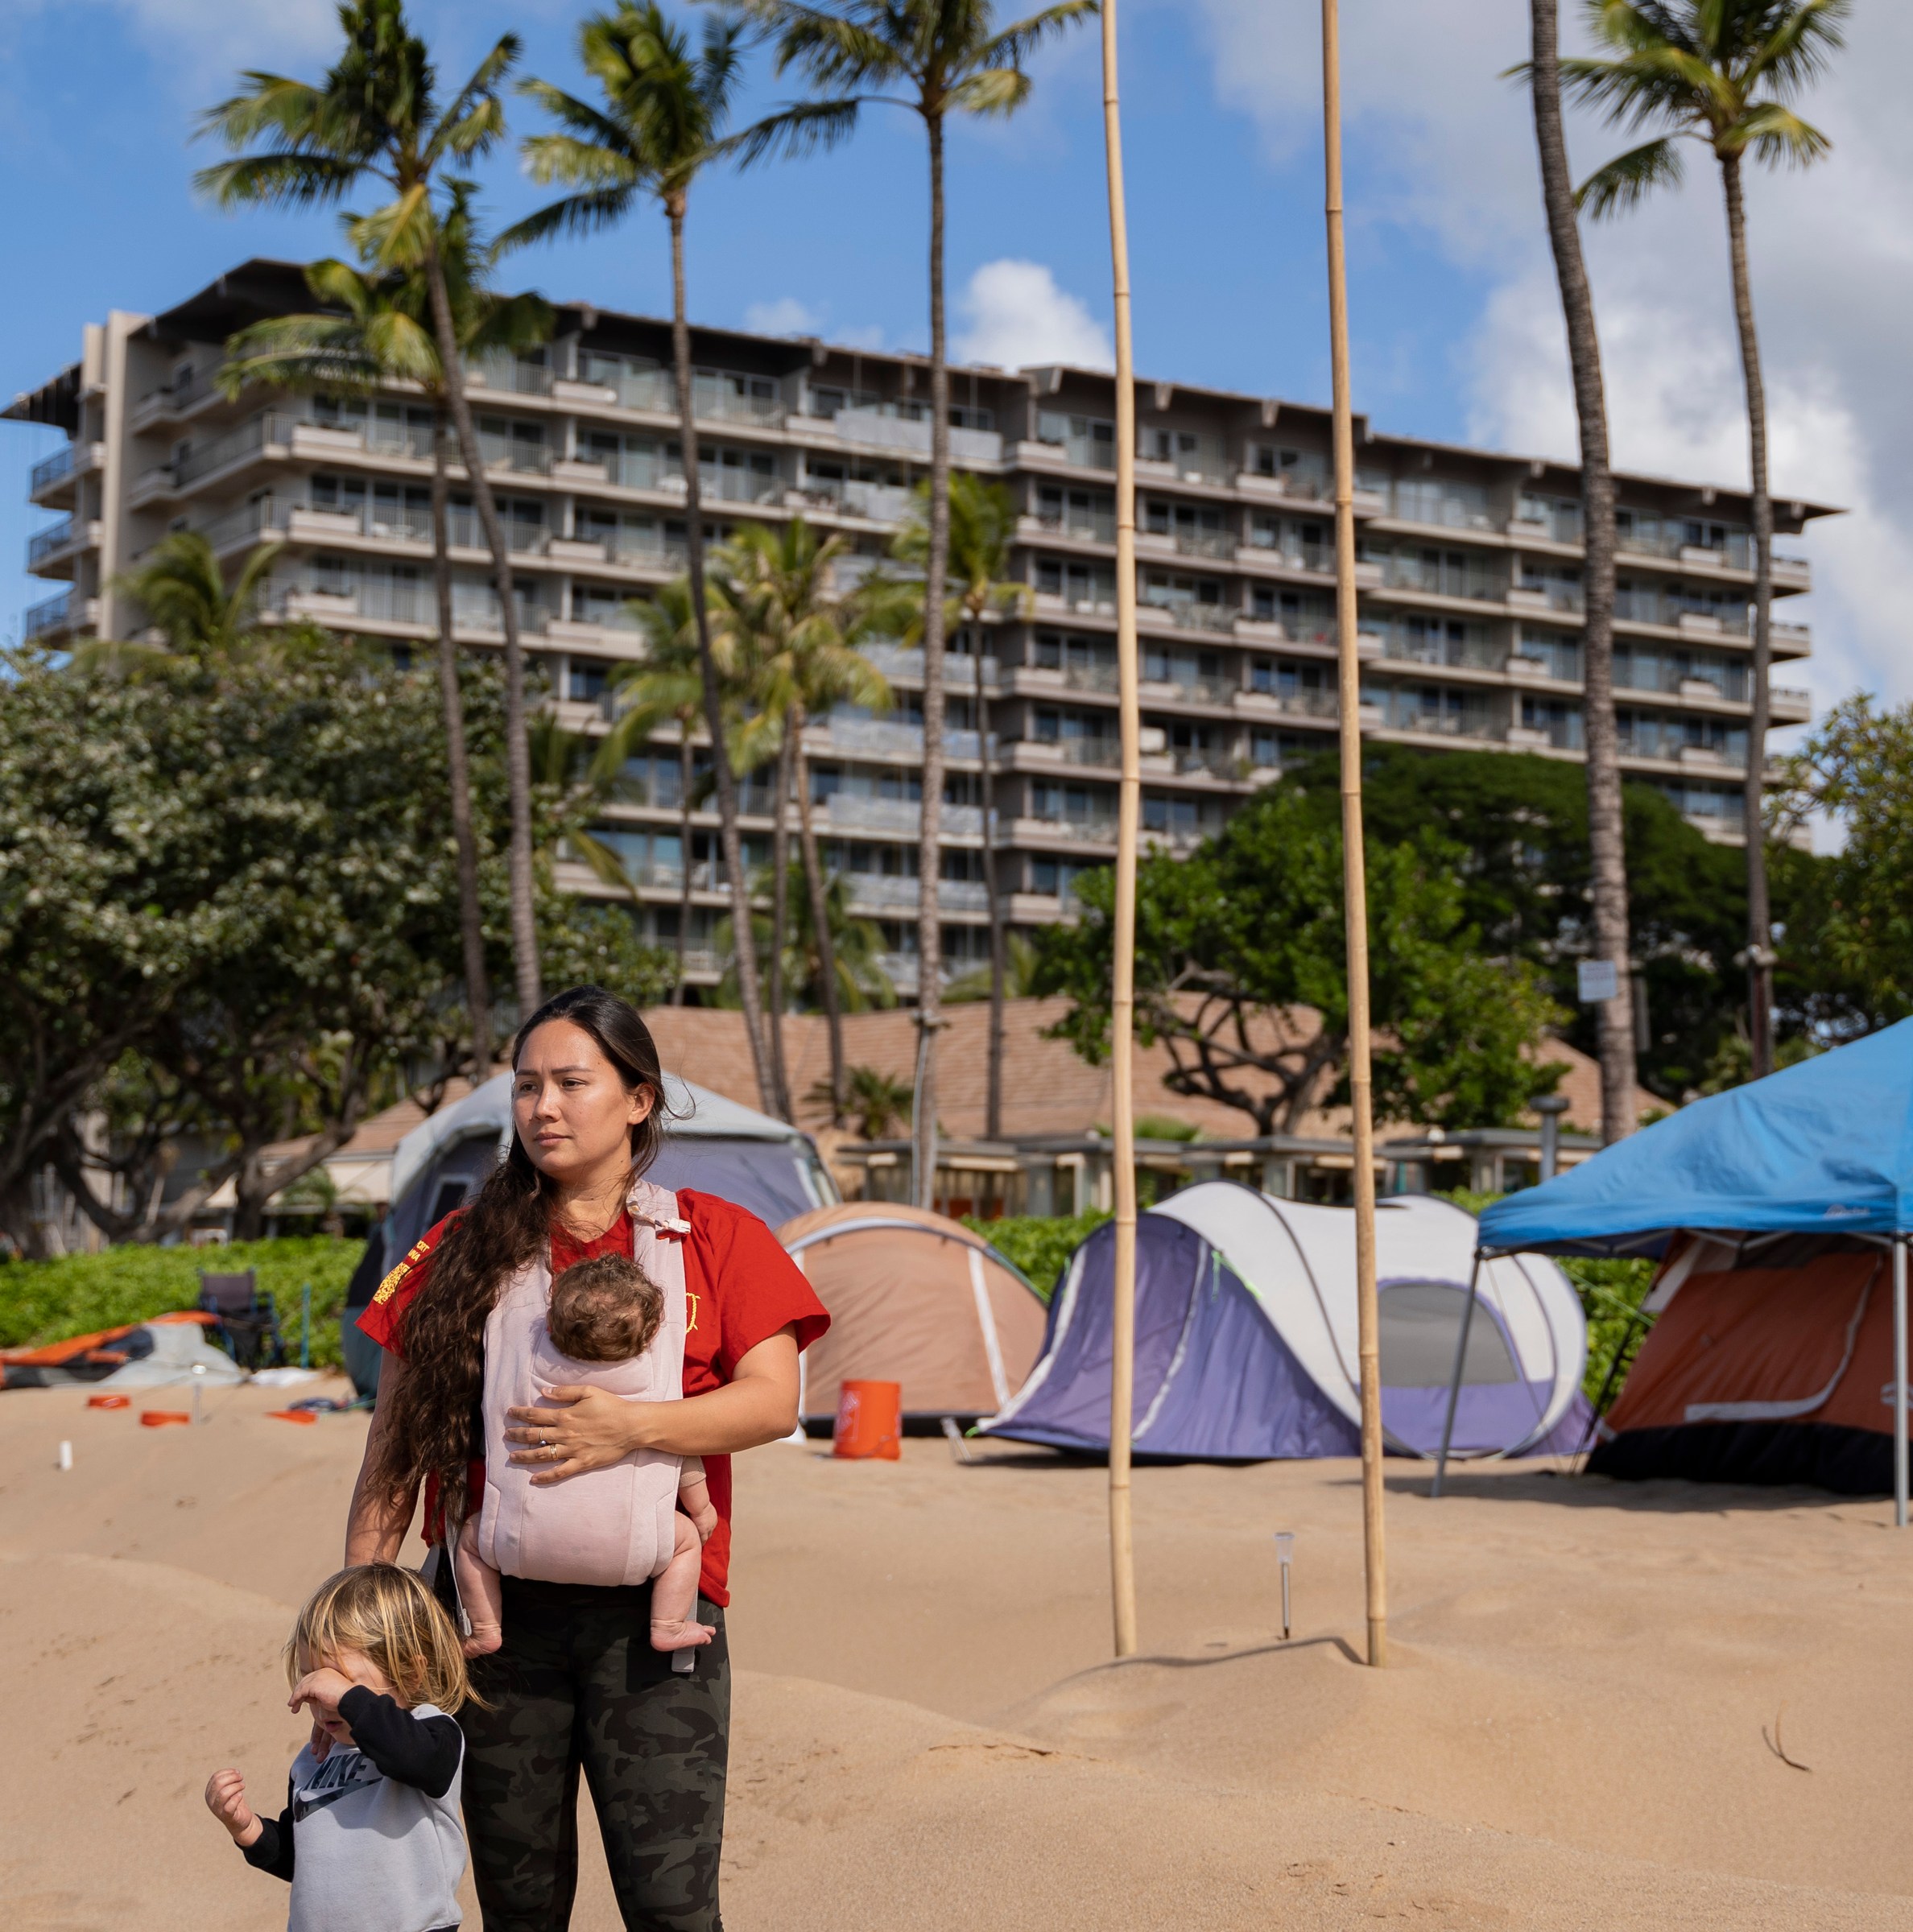 A woman with two young children stands on a beach in front of a multistory hotel, palm trees, and tents.